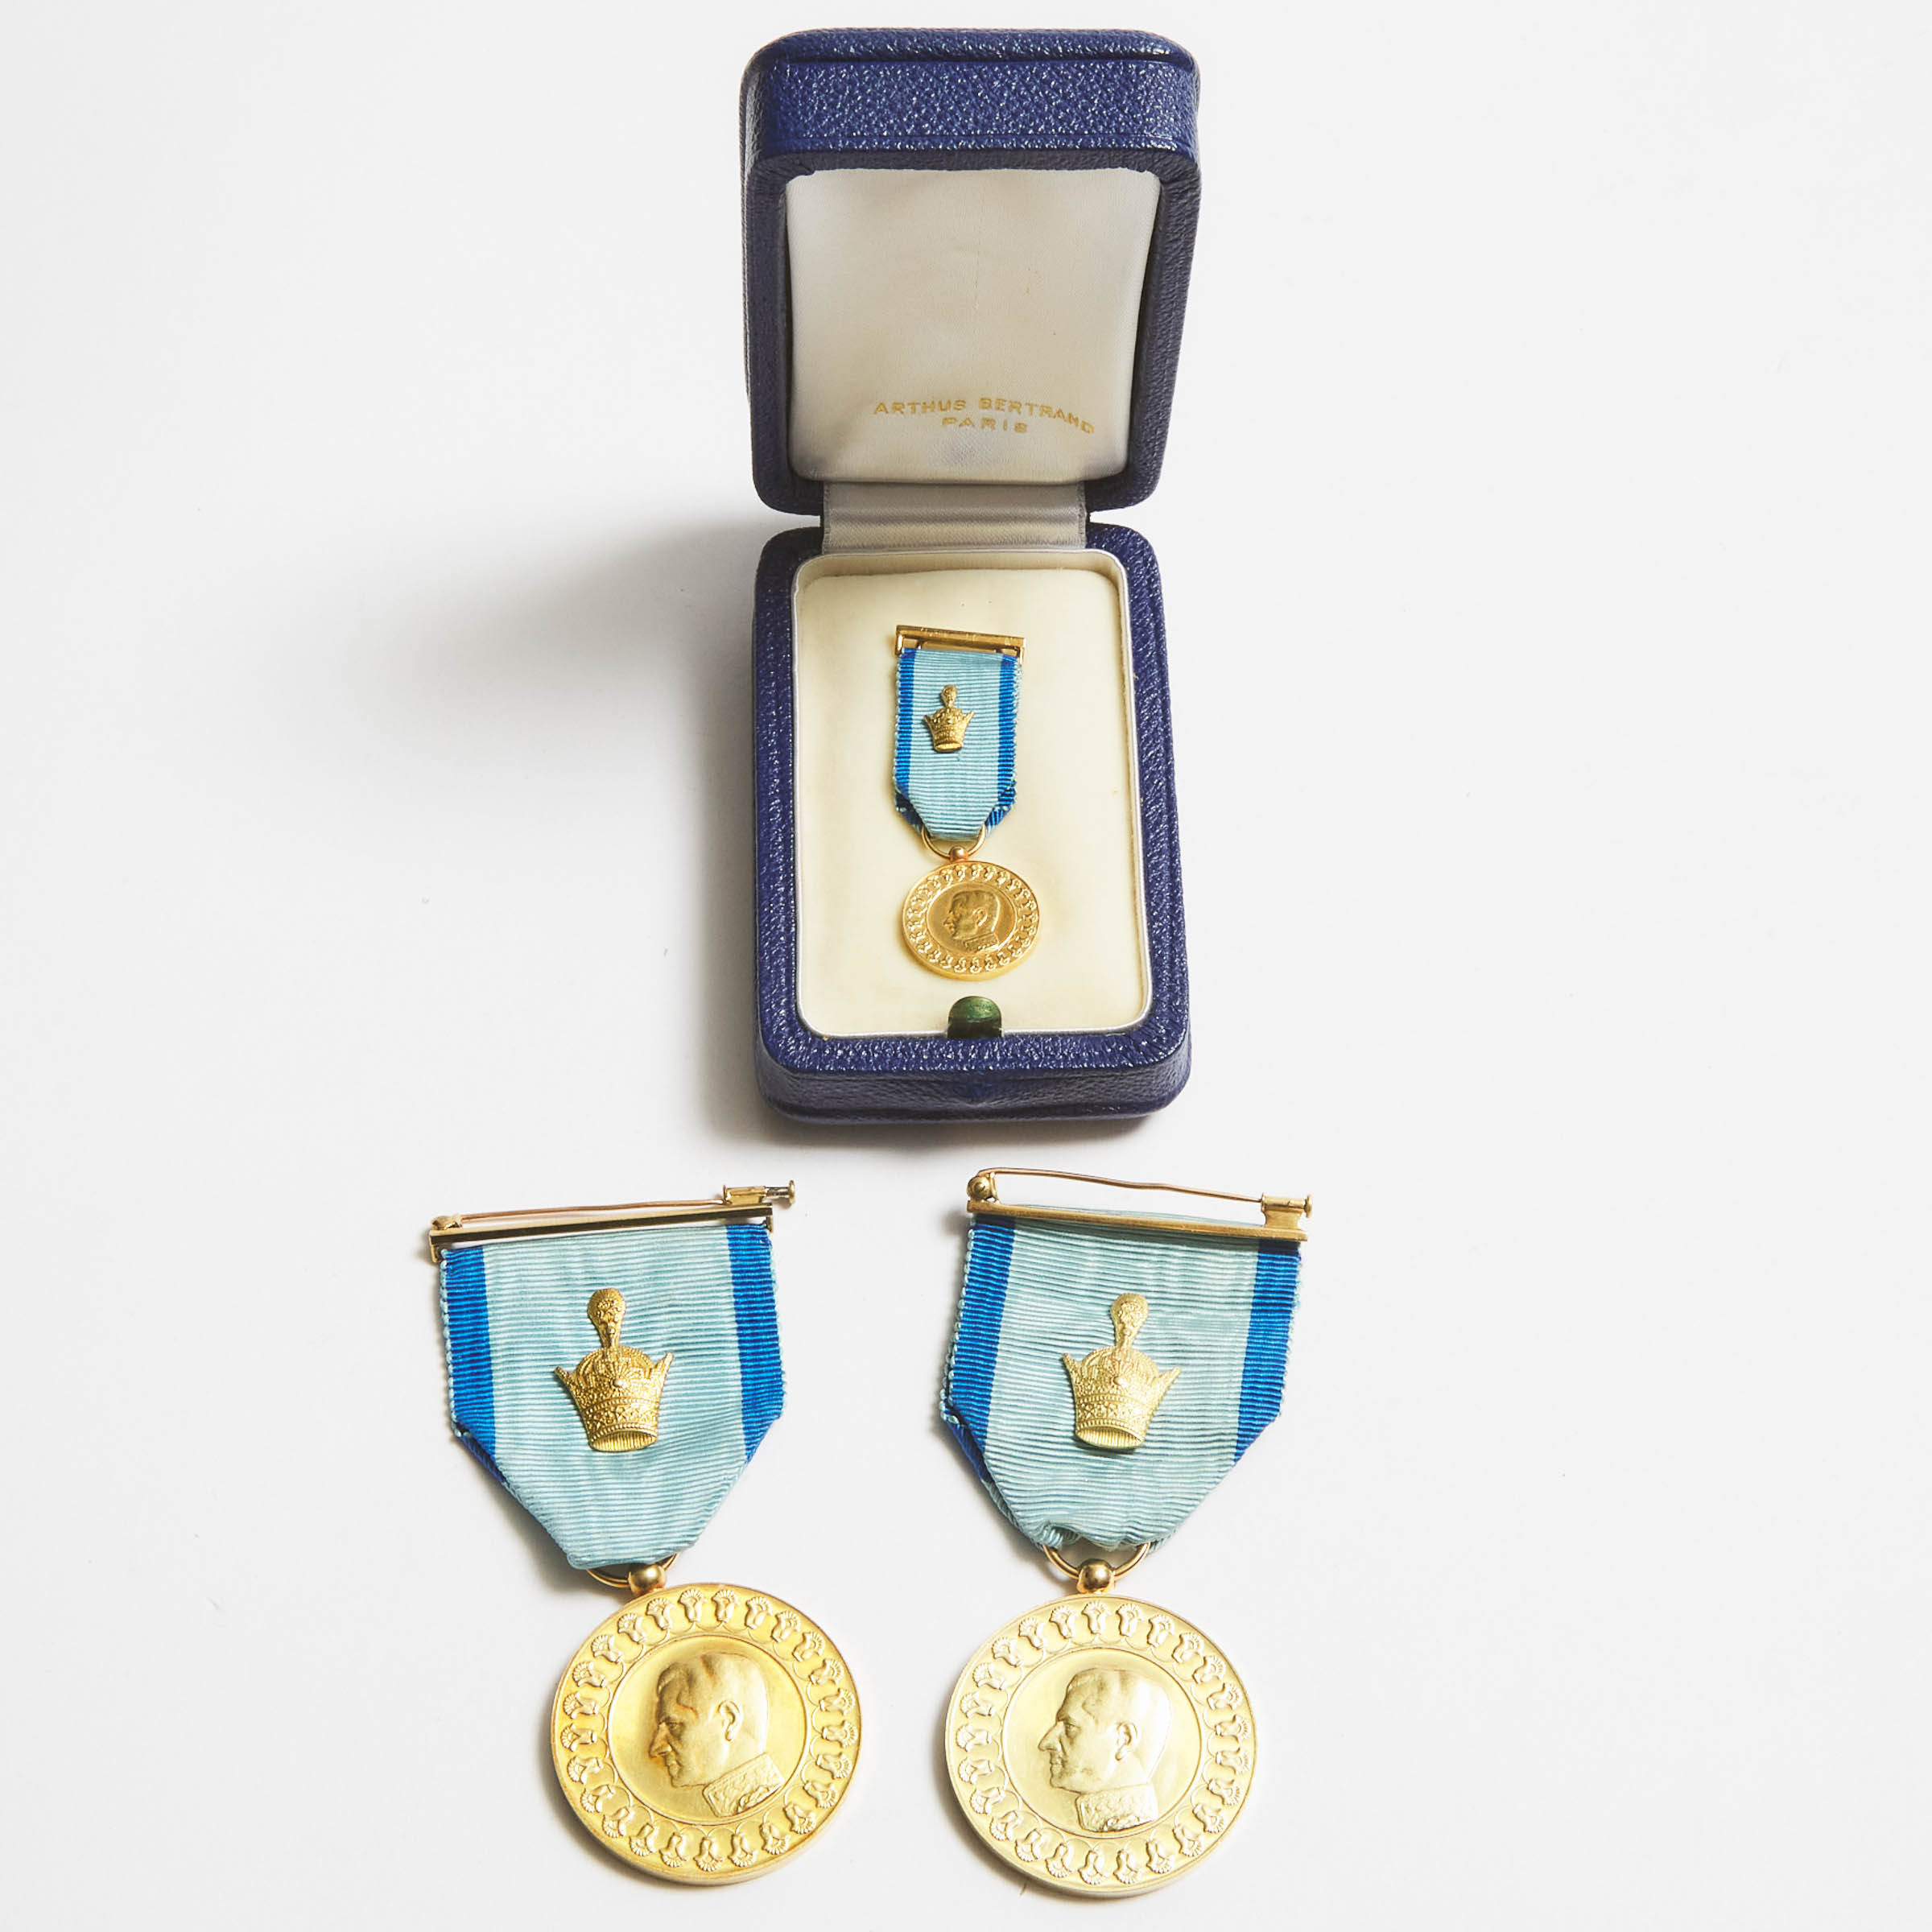 Three Gold Medals Commemorating 3aae8a